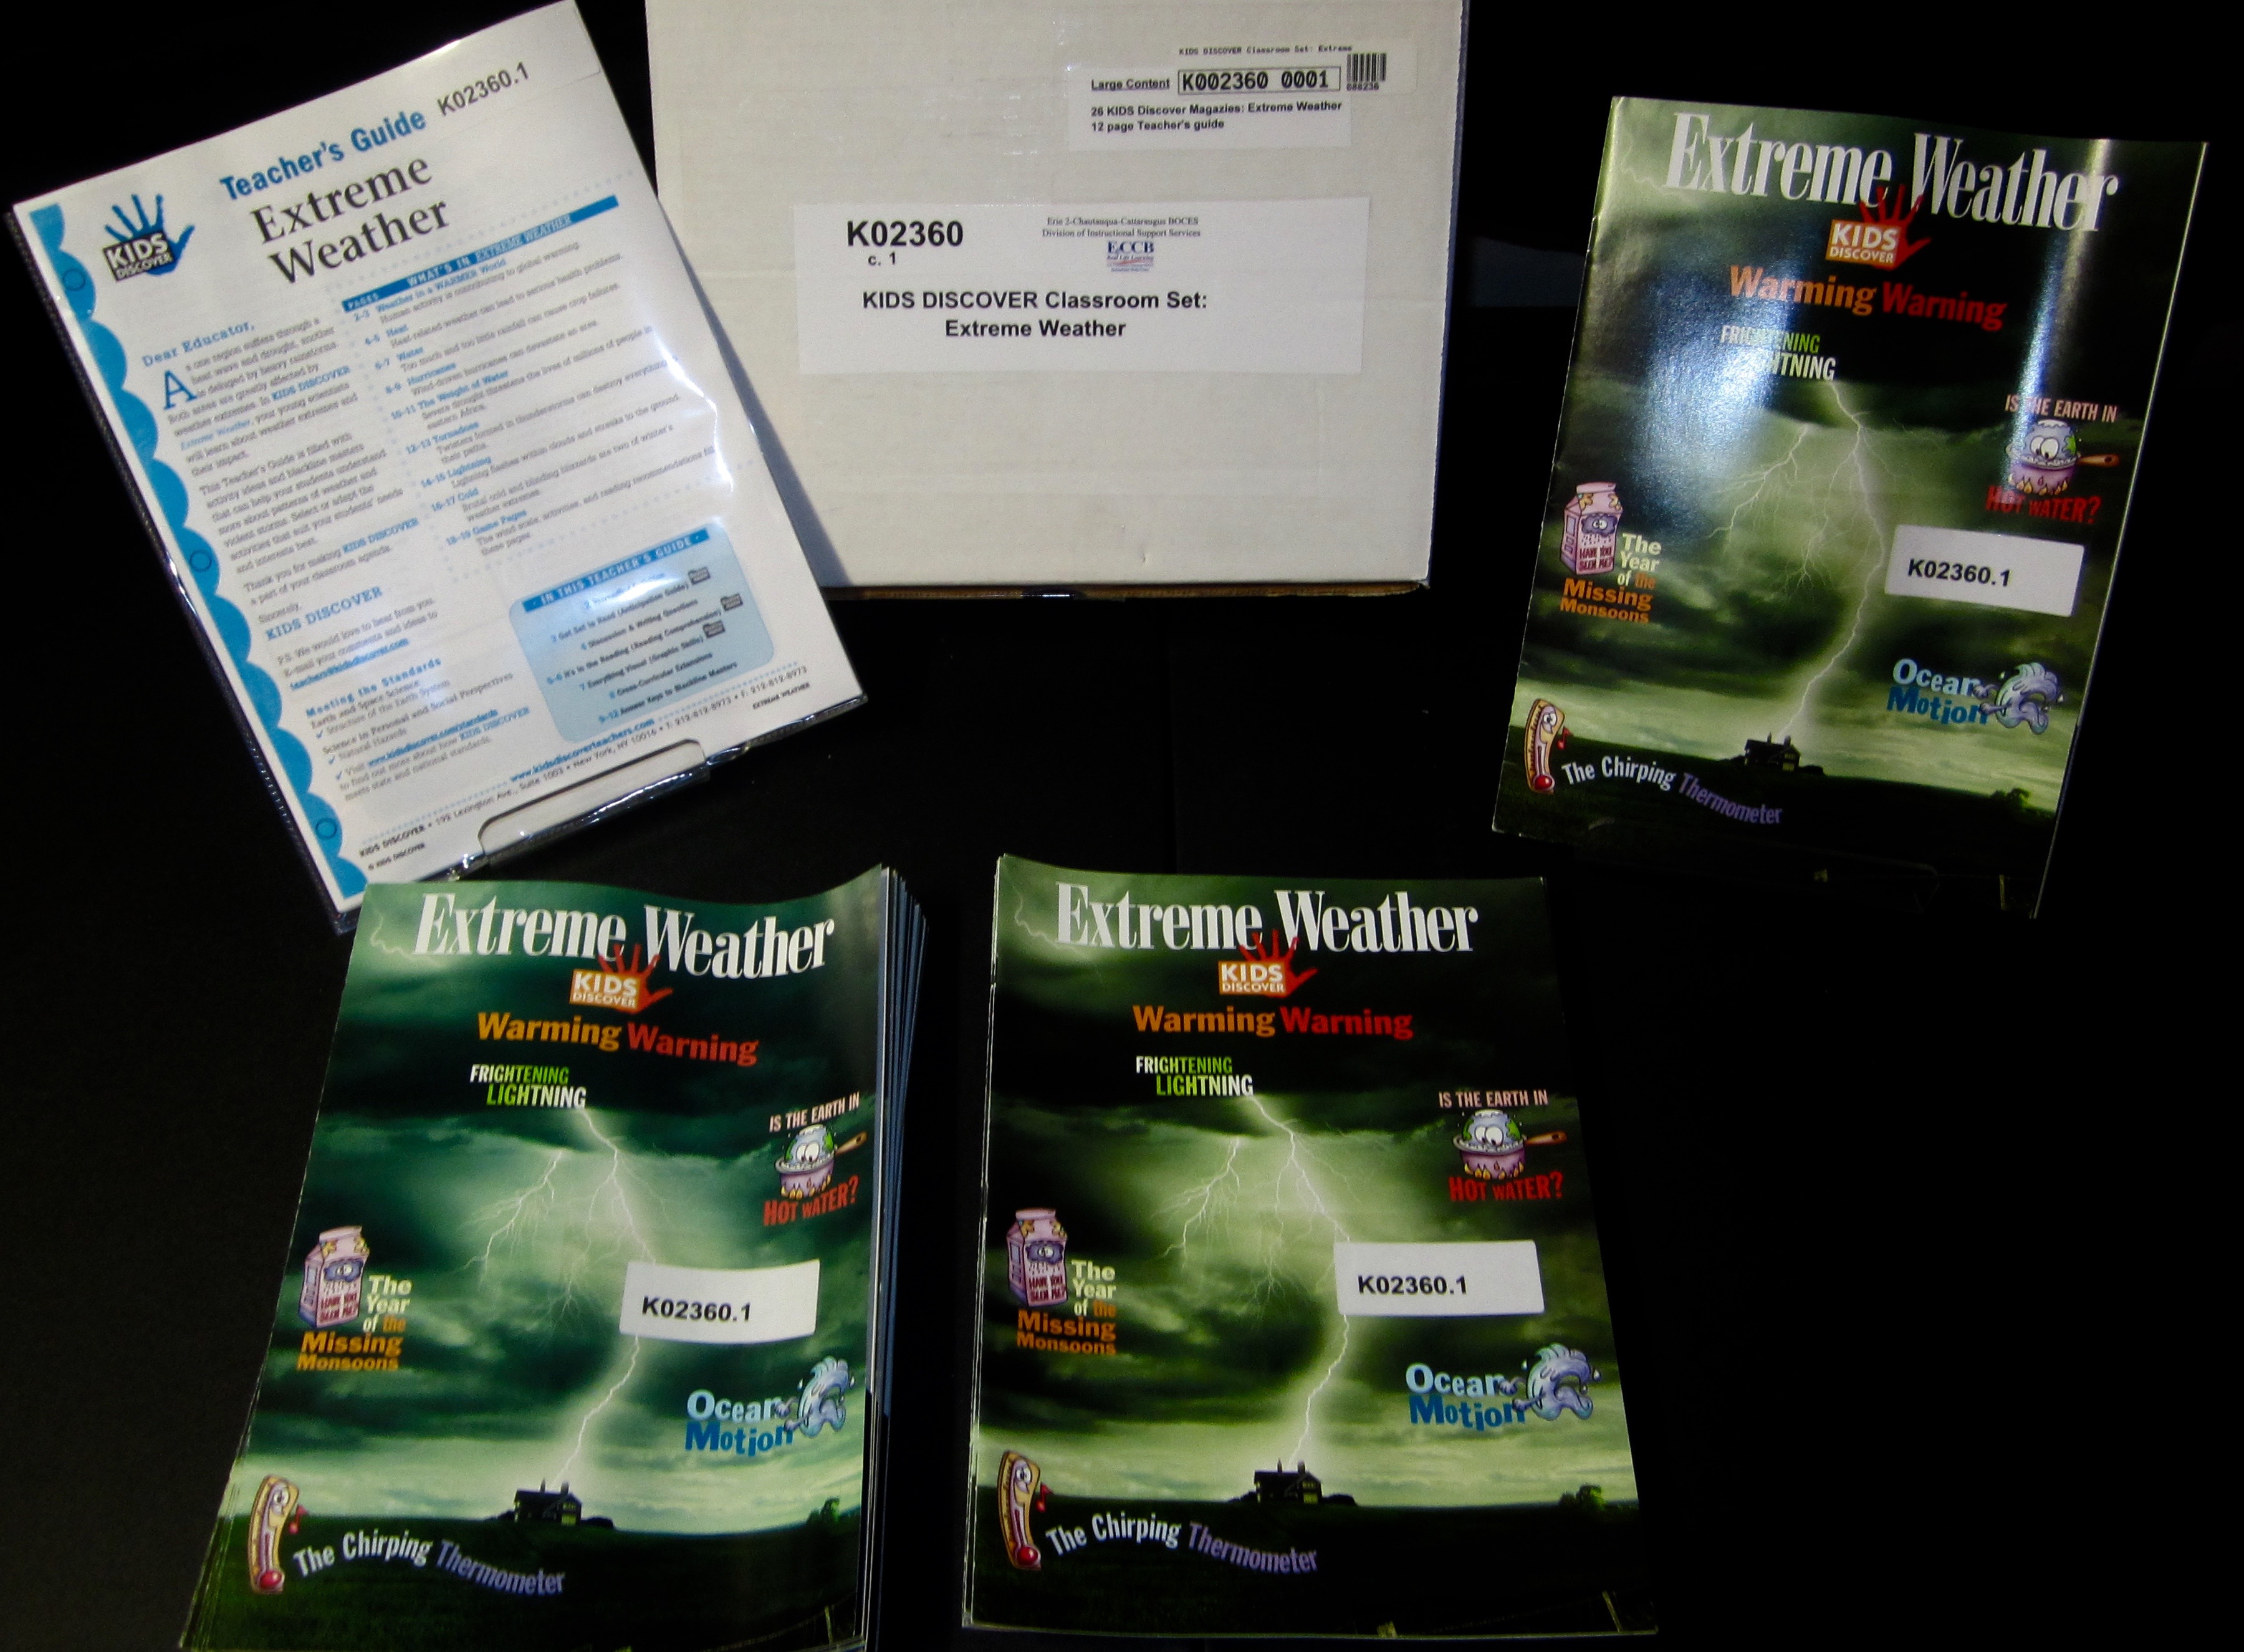 KIDS DISCOVER Classroom Set: Extreme Weather